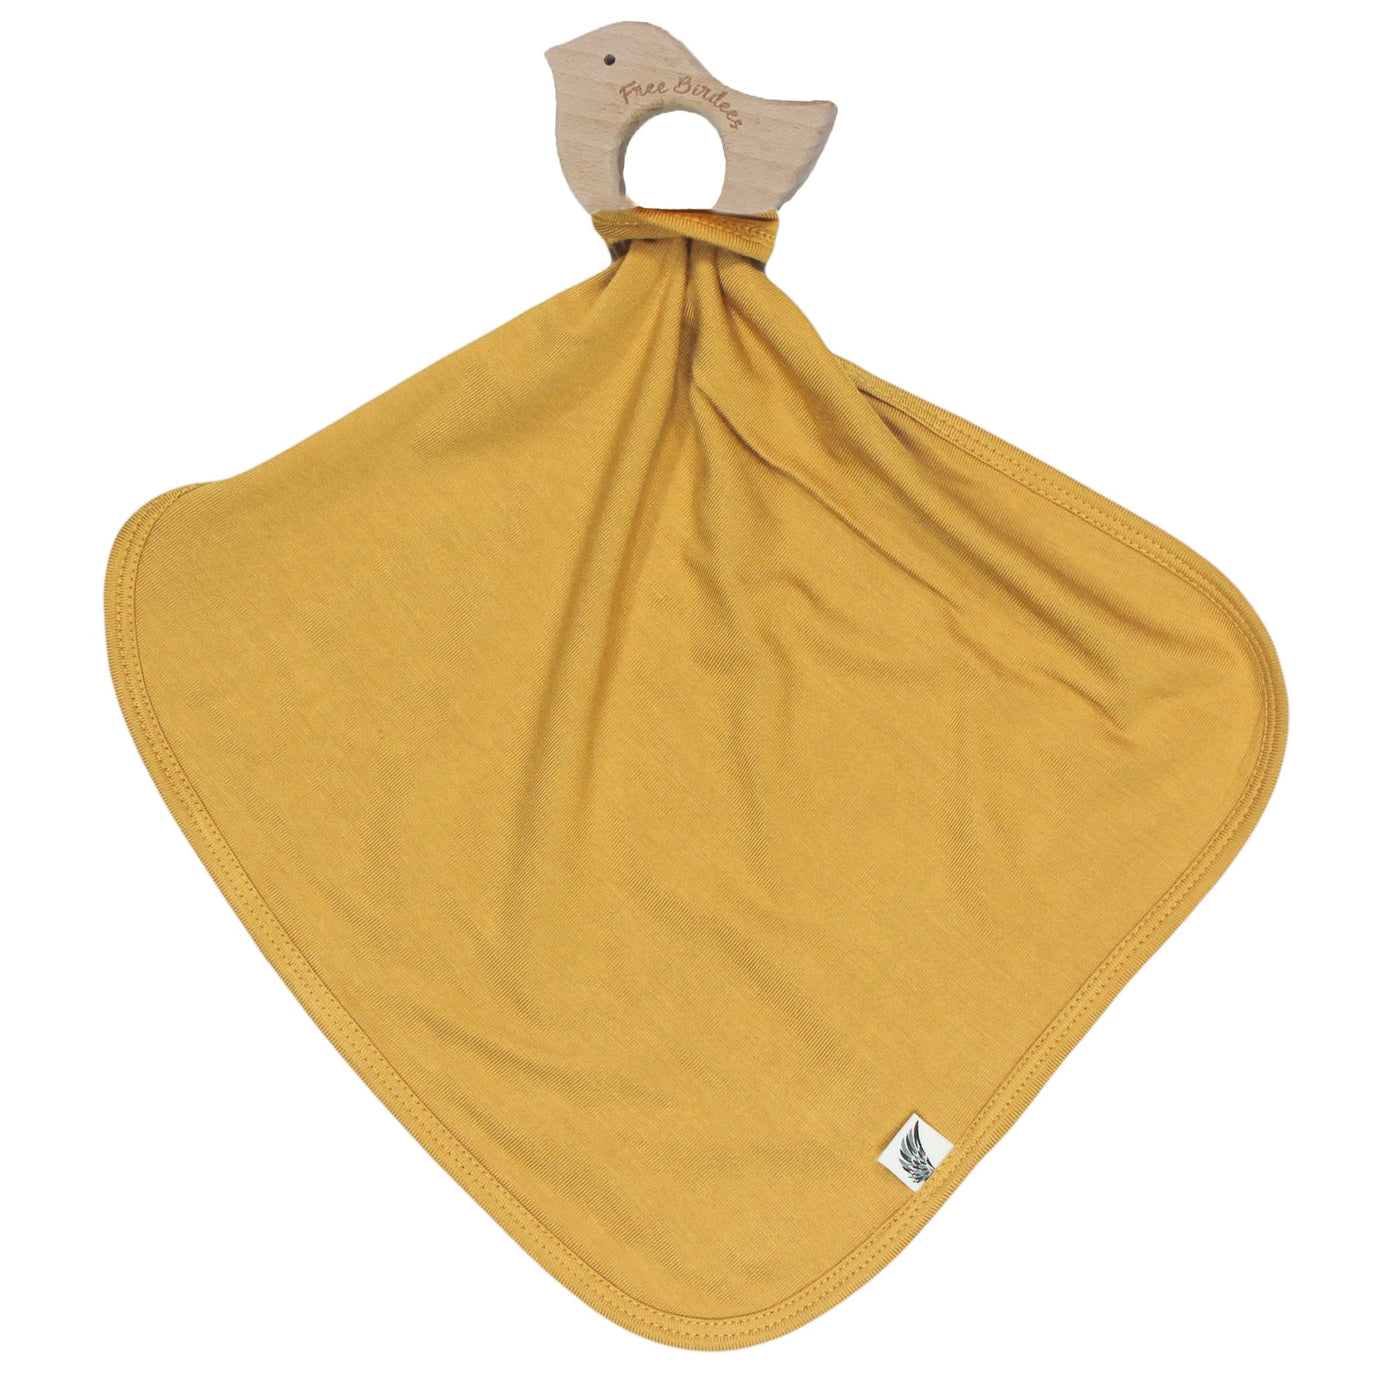 Gold Dust Lovey with Wooden Teether - Free Birdees